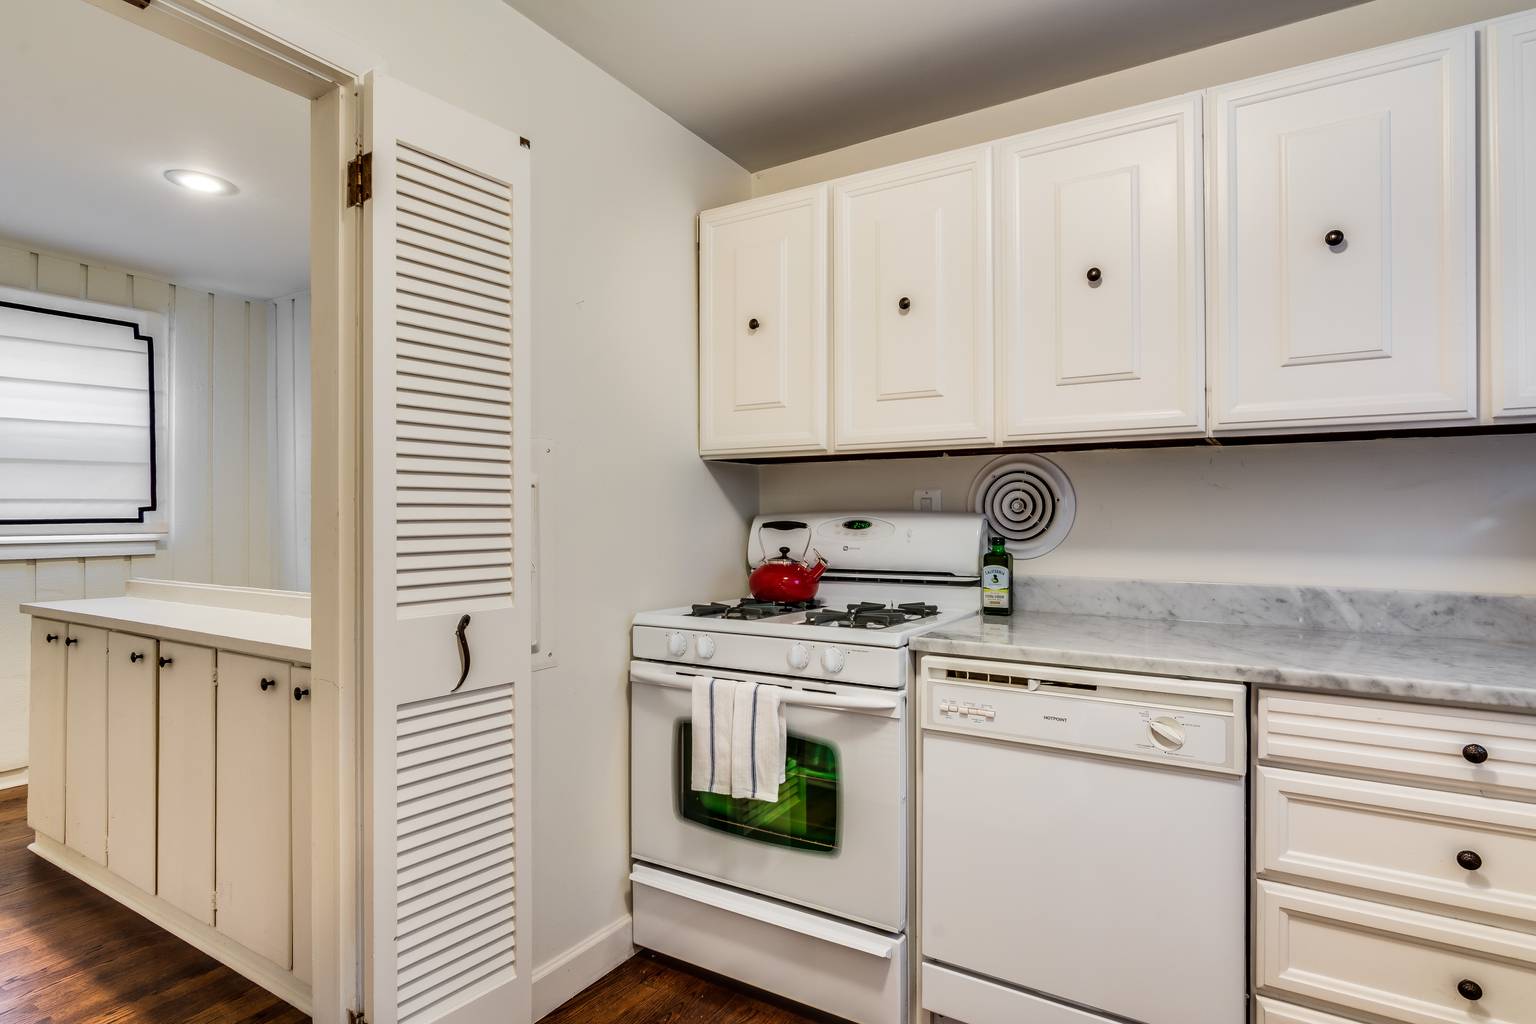 Chicago Vacation Rental